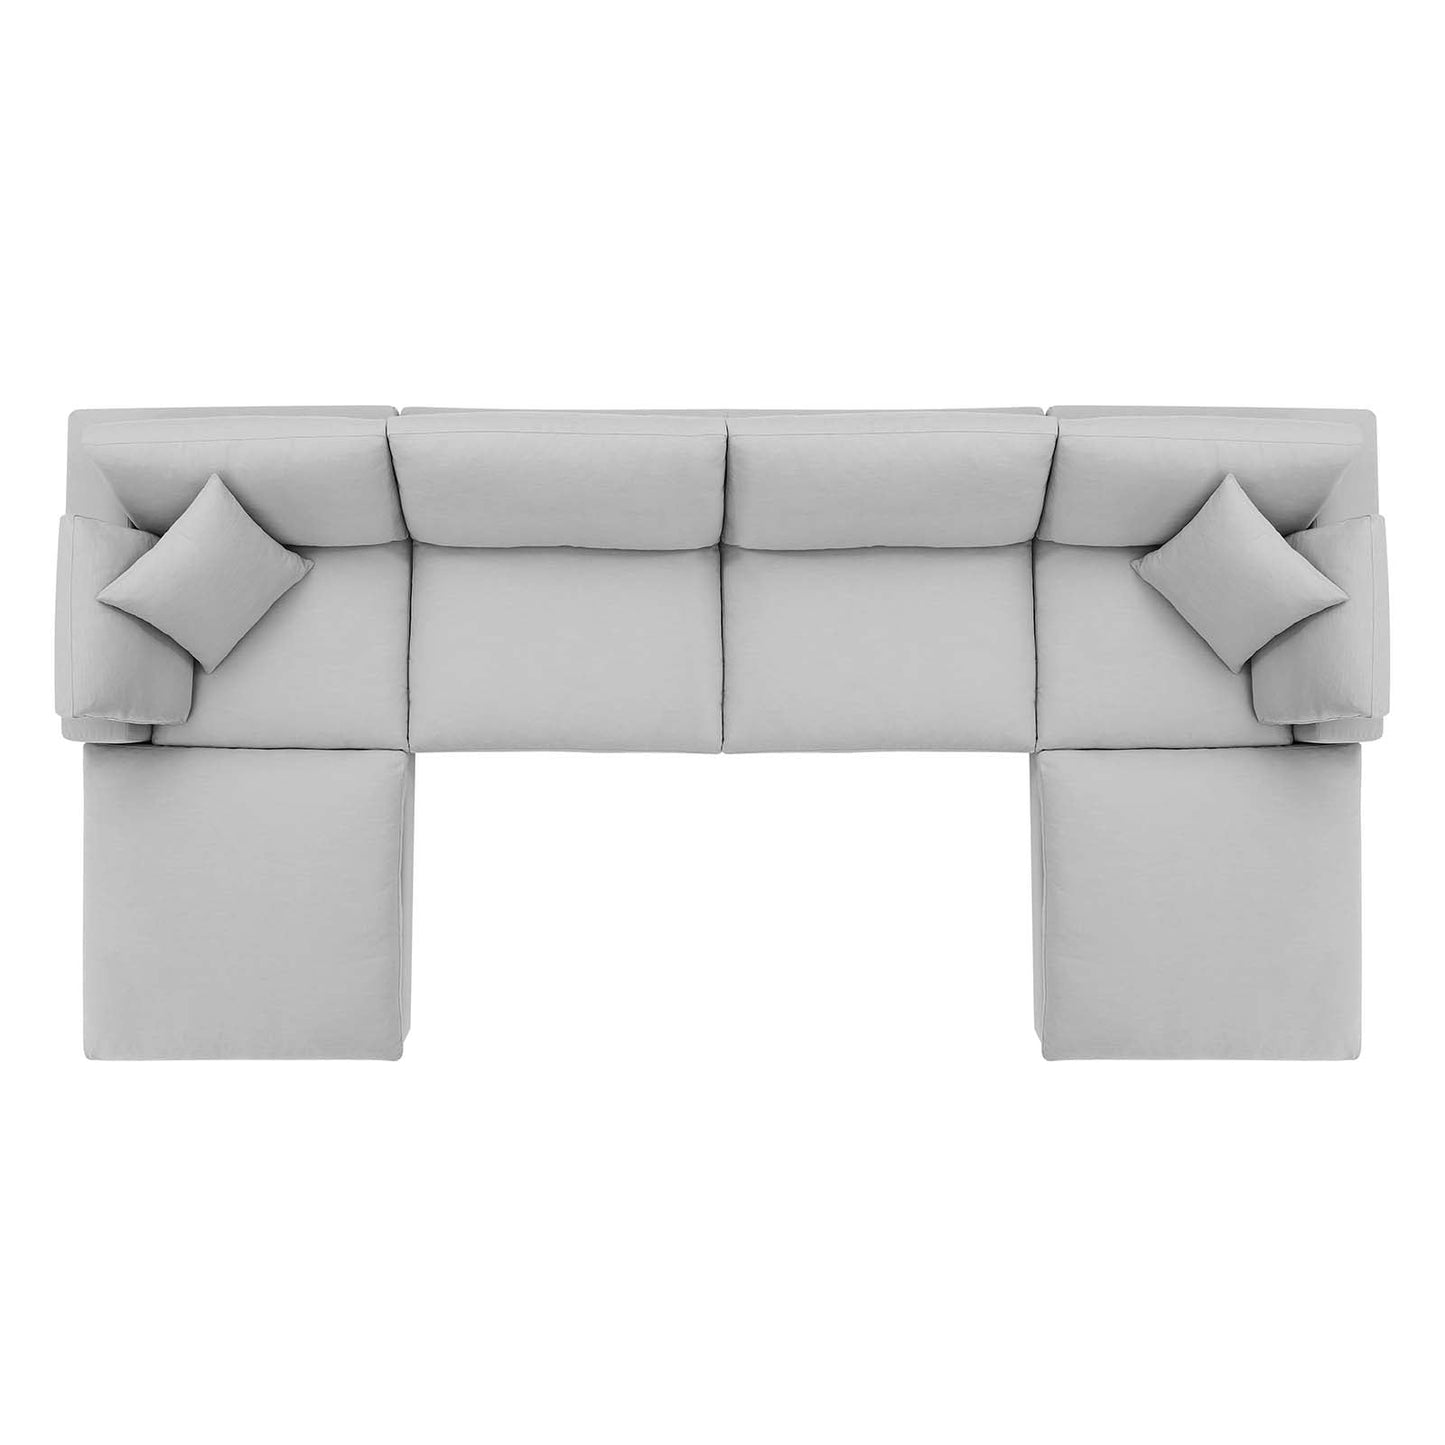 Connie Down Filled Overstuffed 6-Piece Sectional Sofa